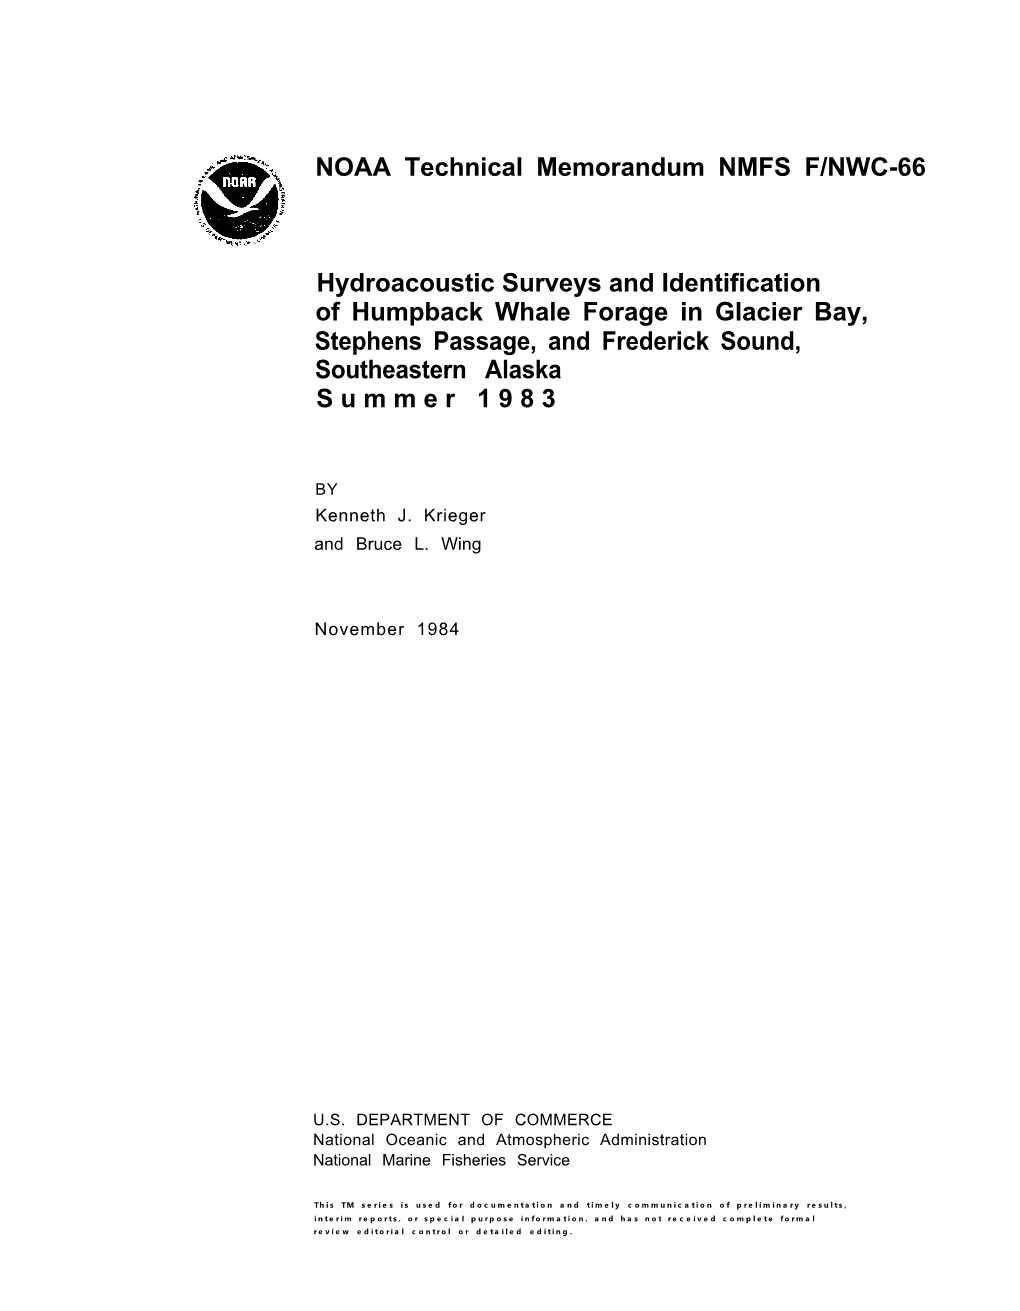 Hydroacoustic Surveys and Identification of Humpback Whale Forage in Glacier Bay, Stephens Passage, and Frederick Sound, Southeastern Alaska Summer 1983